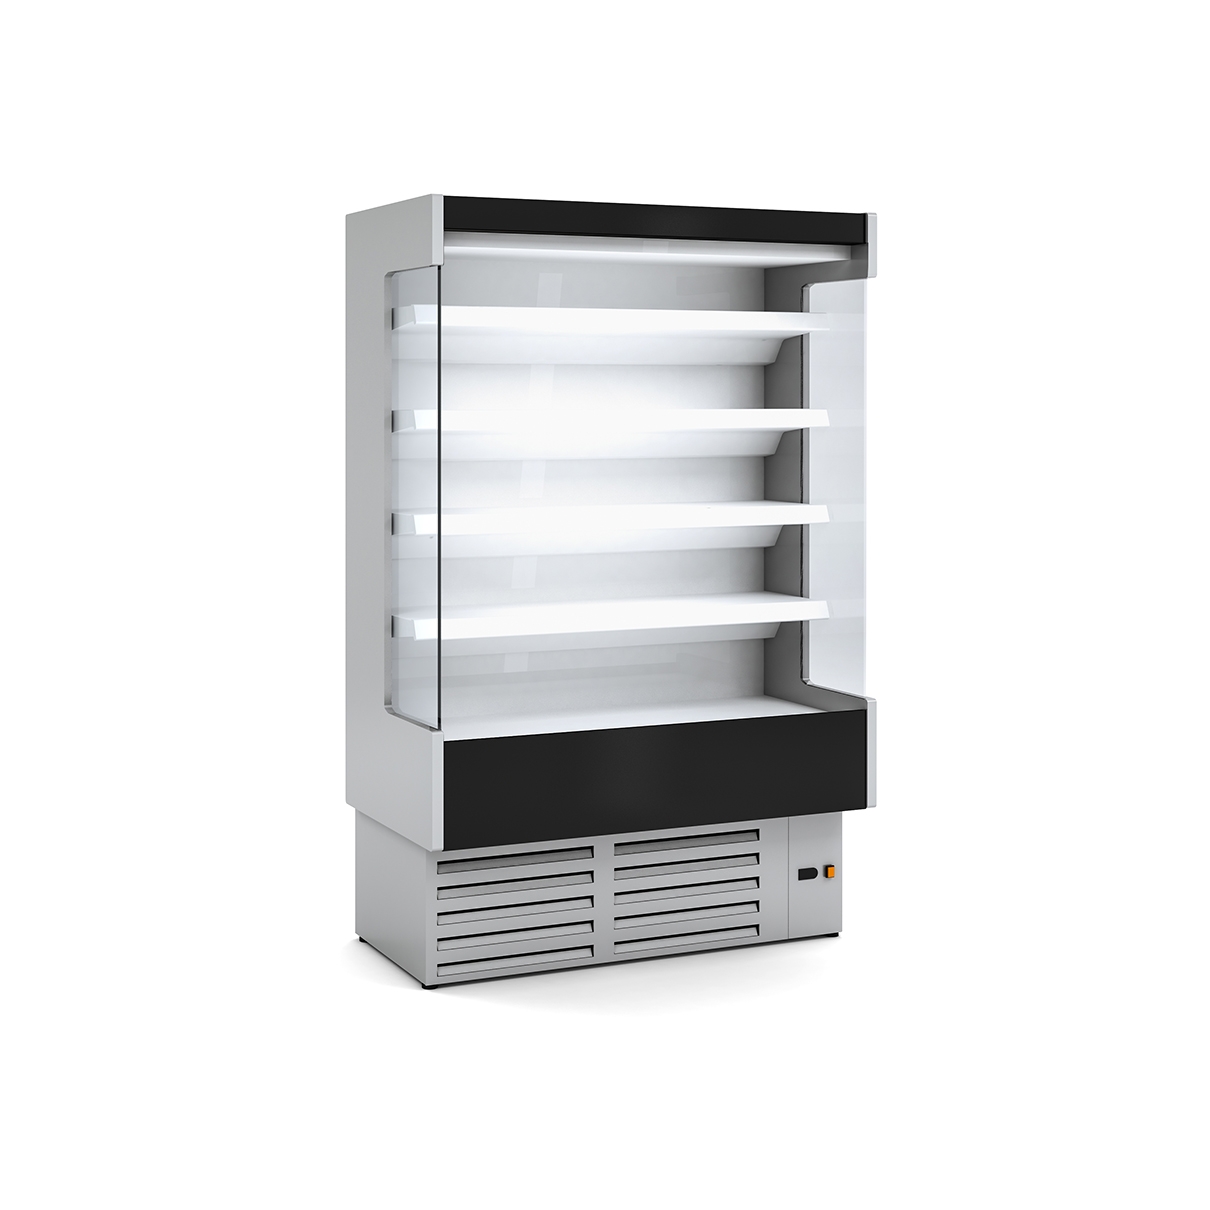 copy of REFRIGERATED WALL CABINET DS1 M1-M2